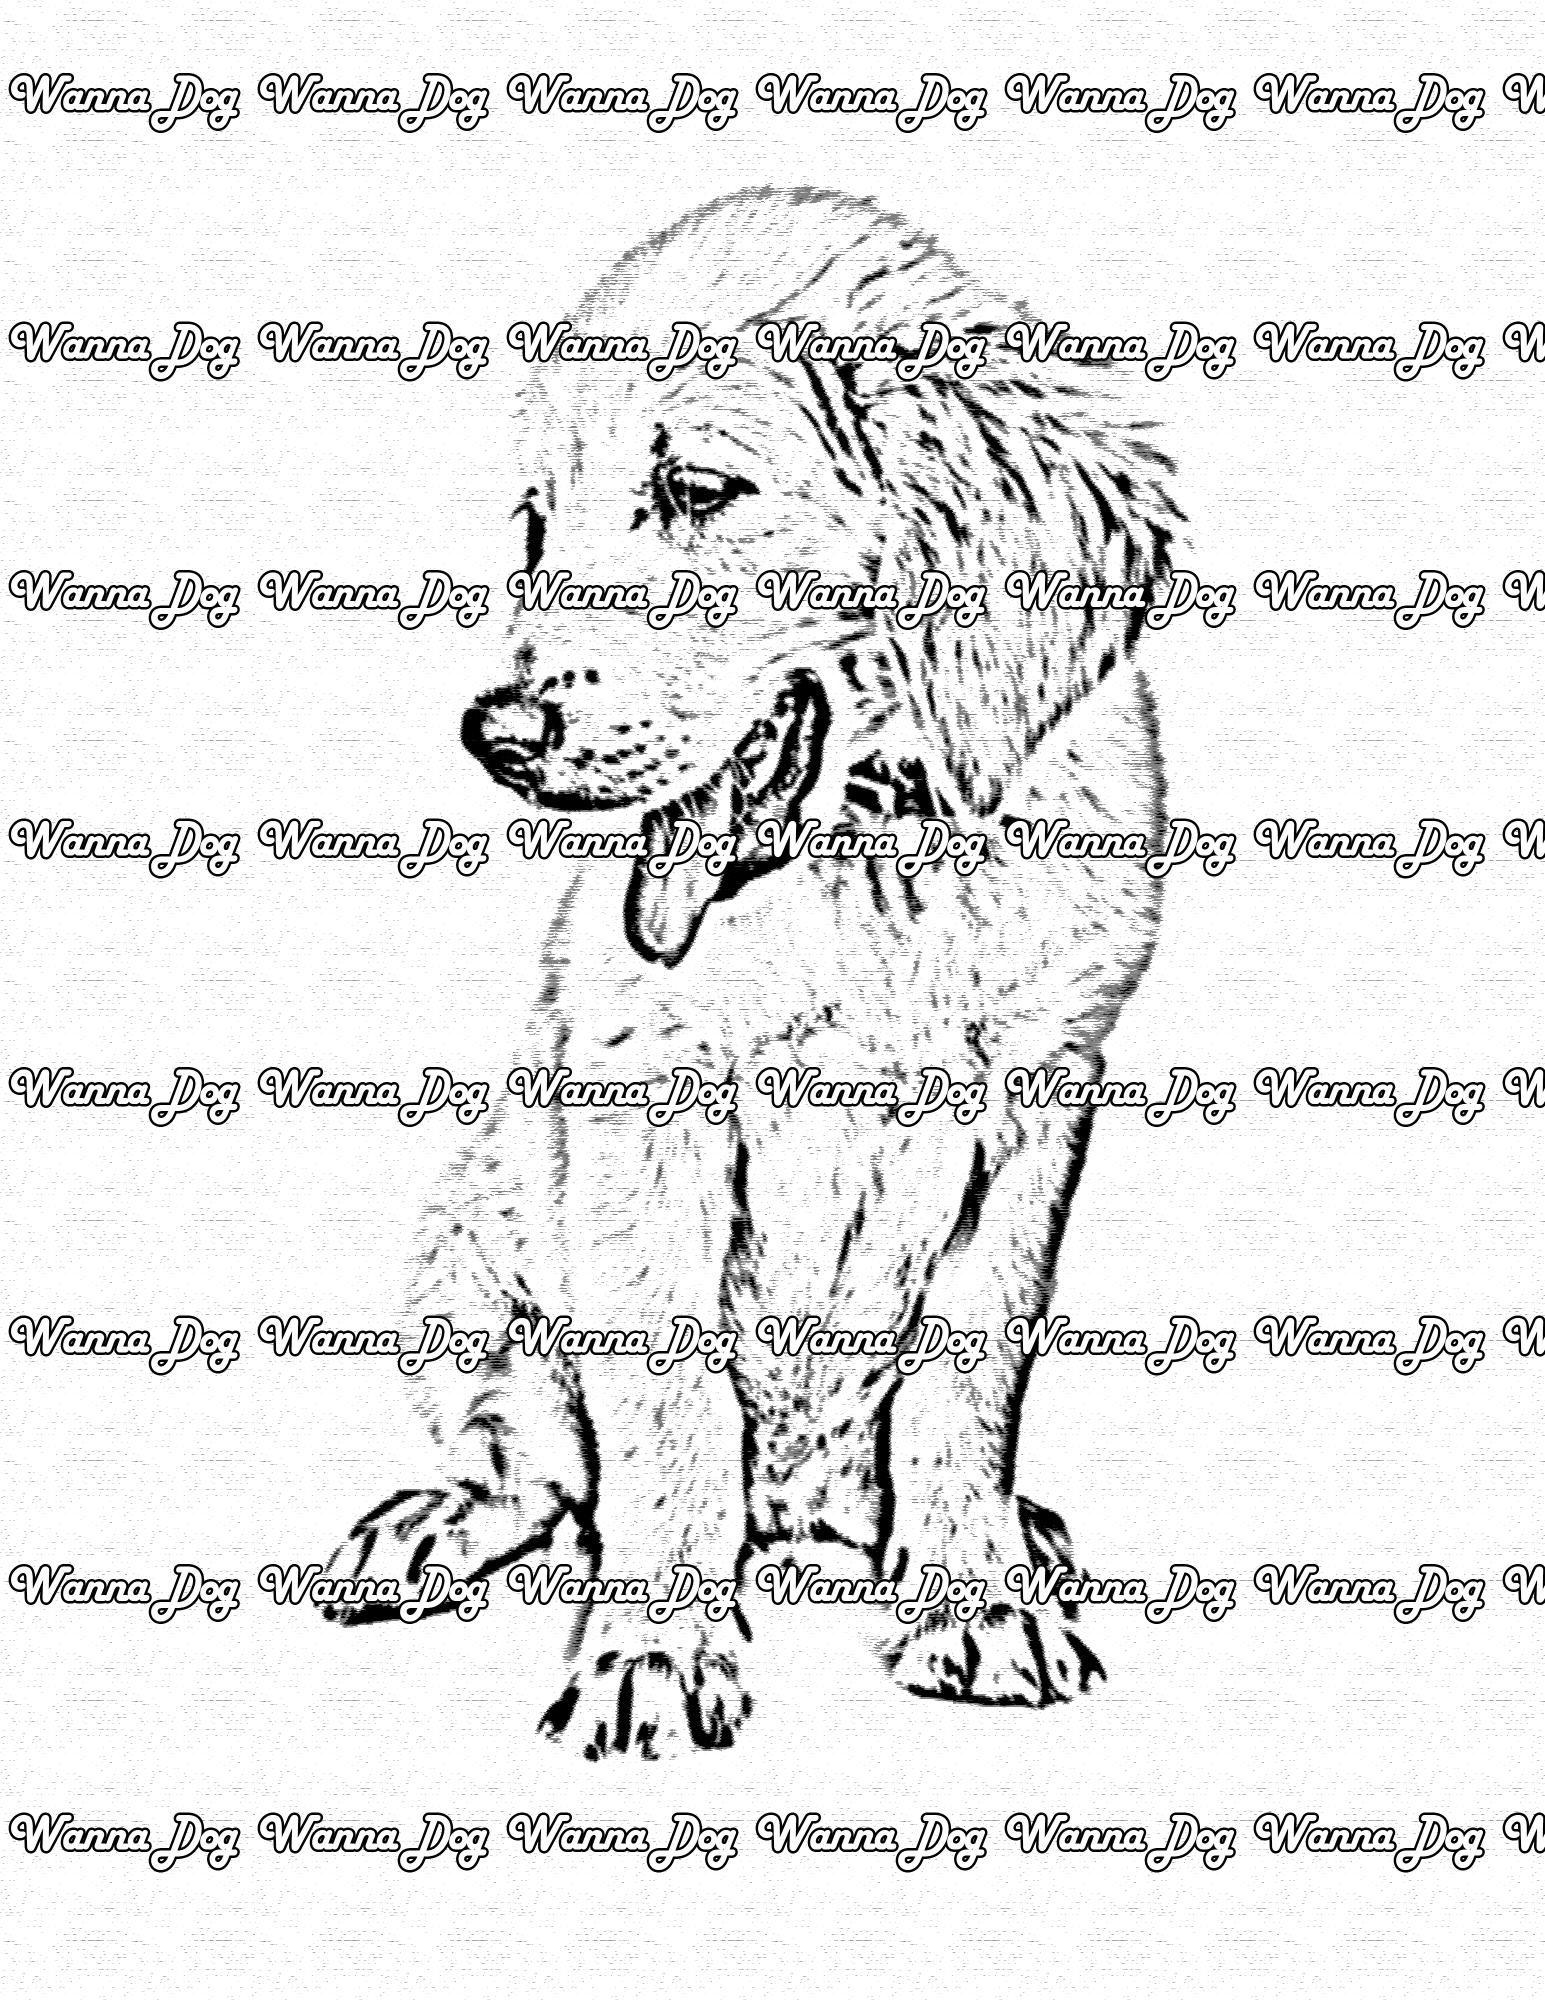 Golden Retriever Puppy Coloring Page of a Golden Retriever Puppy posing with their tongue out